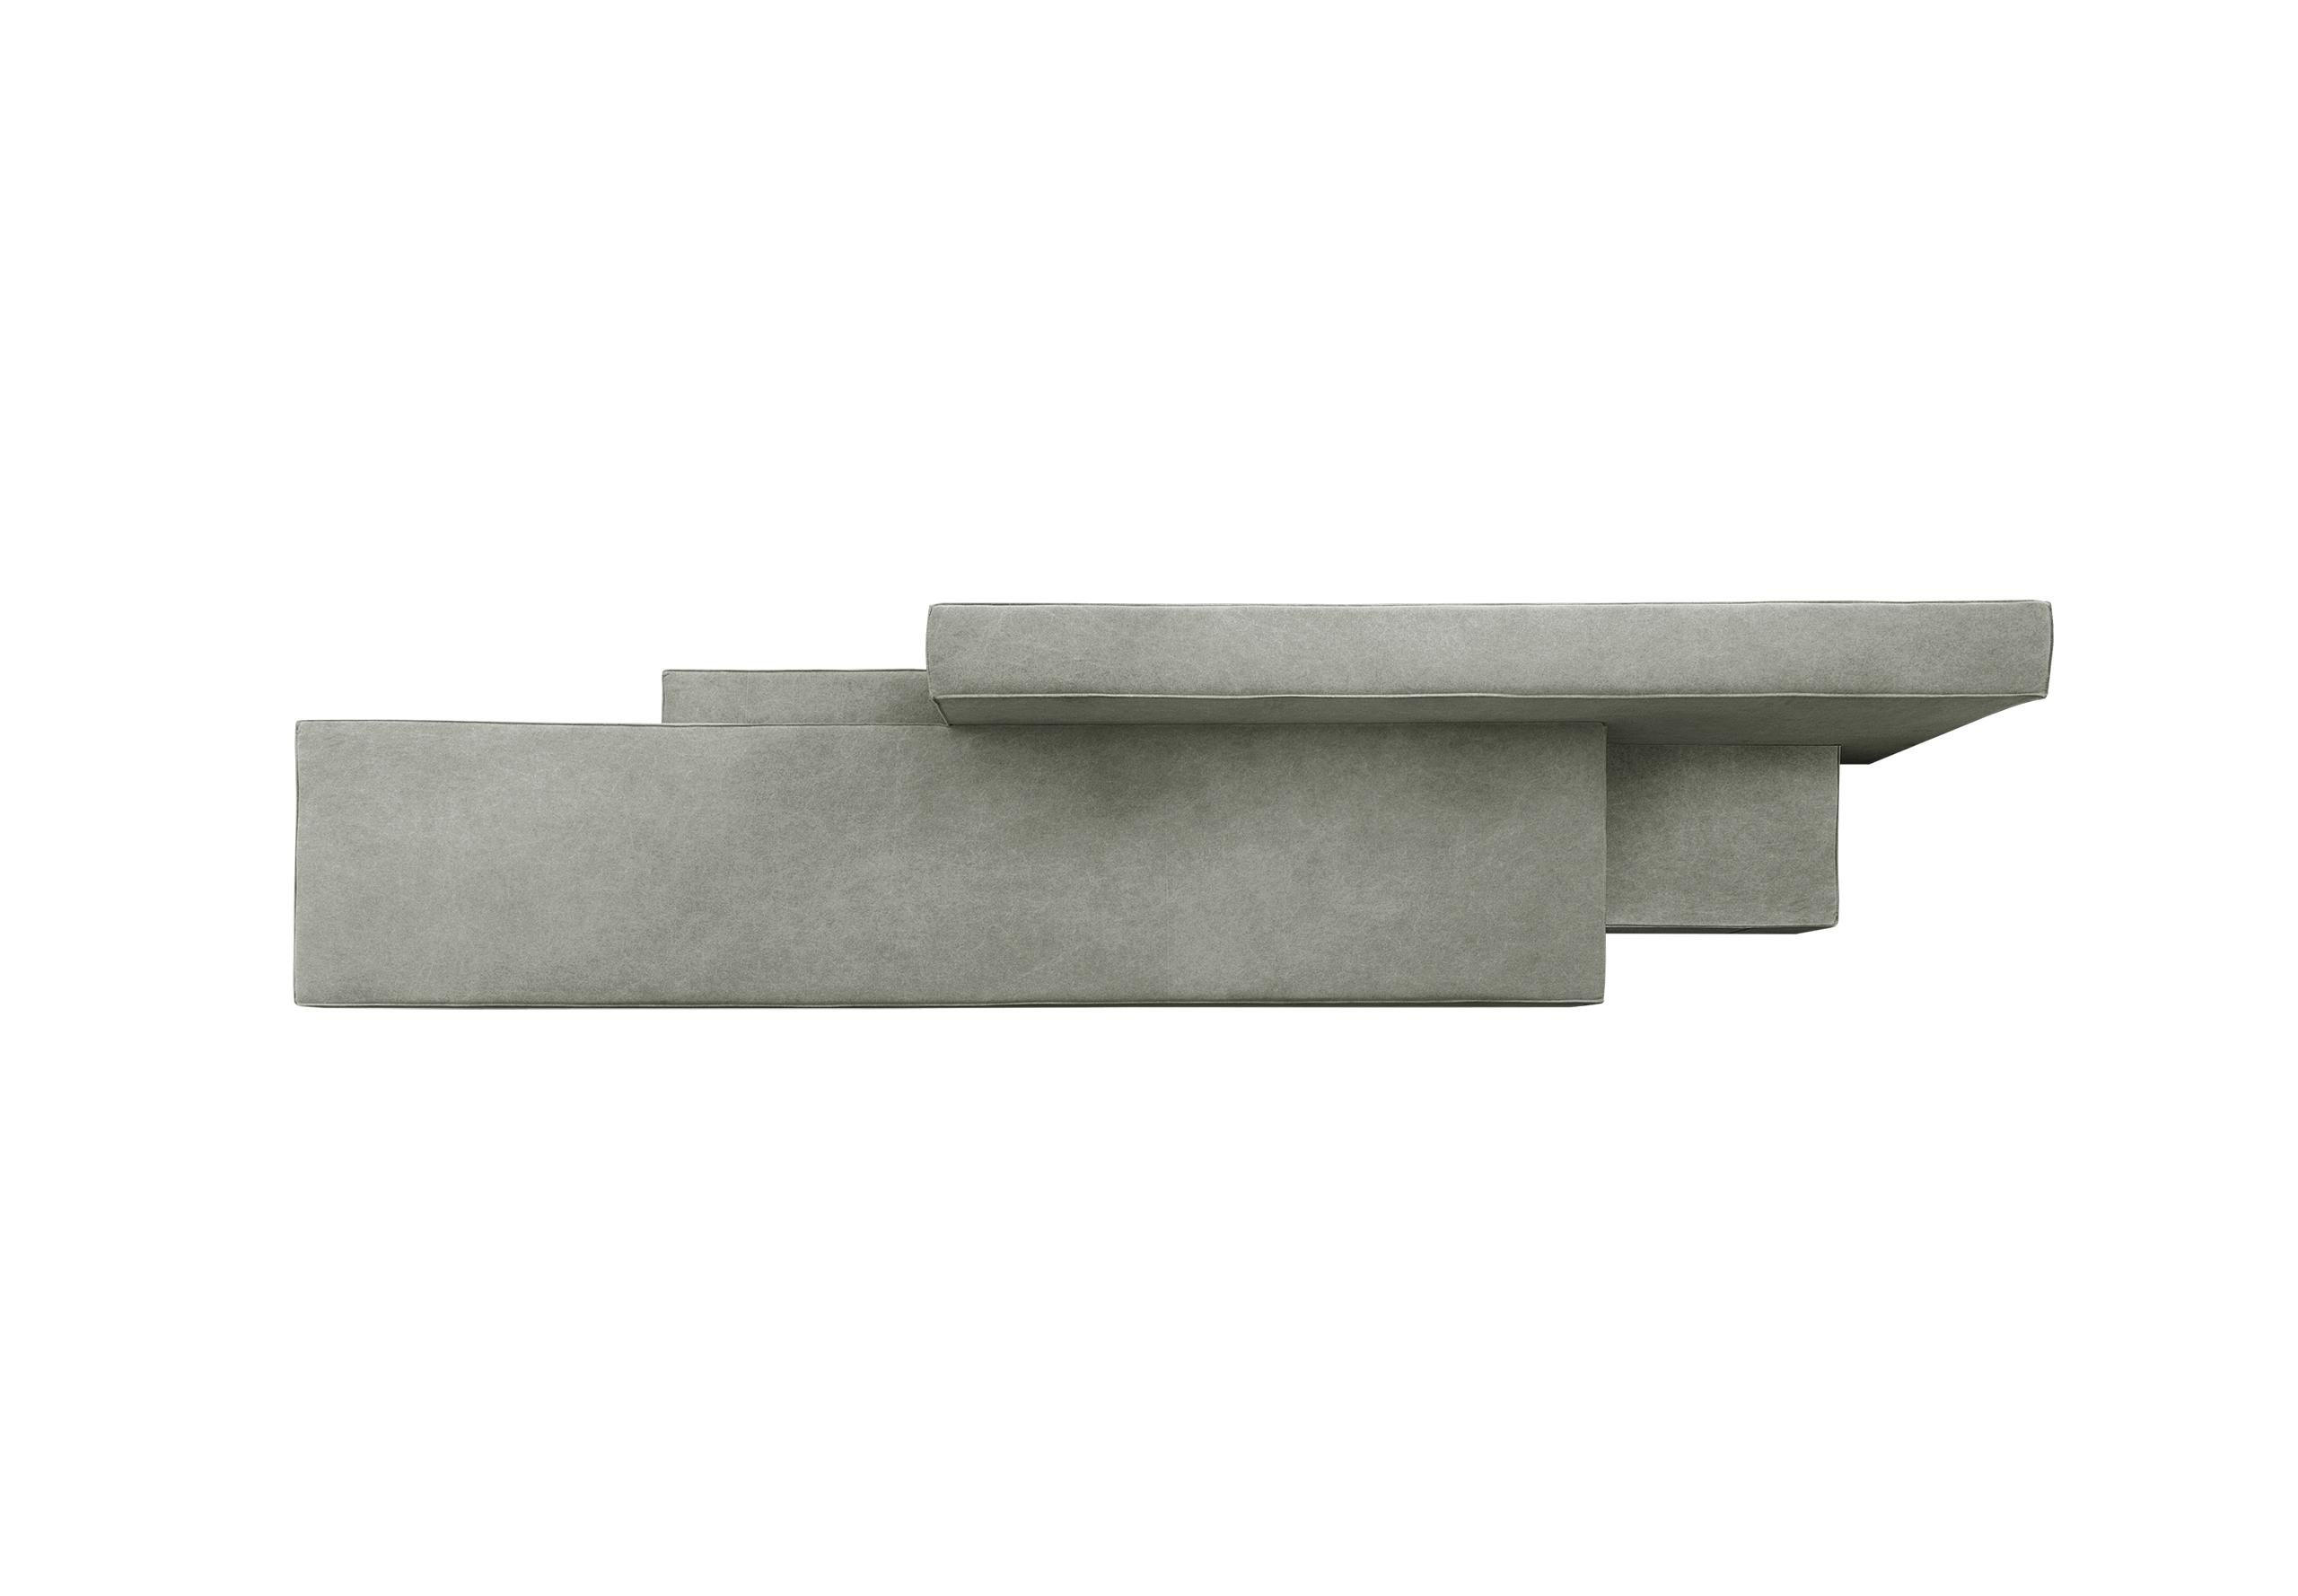 Minimalist Cantilevered Sofa PK1 in Fendi Green Canvas Upholstery by Paulo Kobylka For Sale